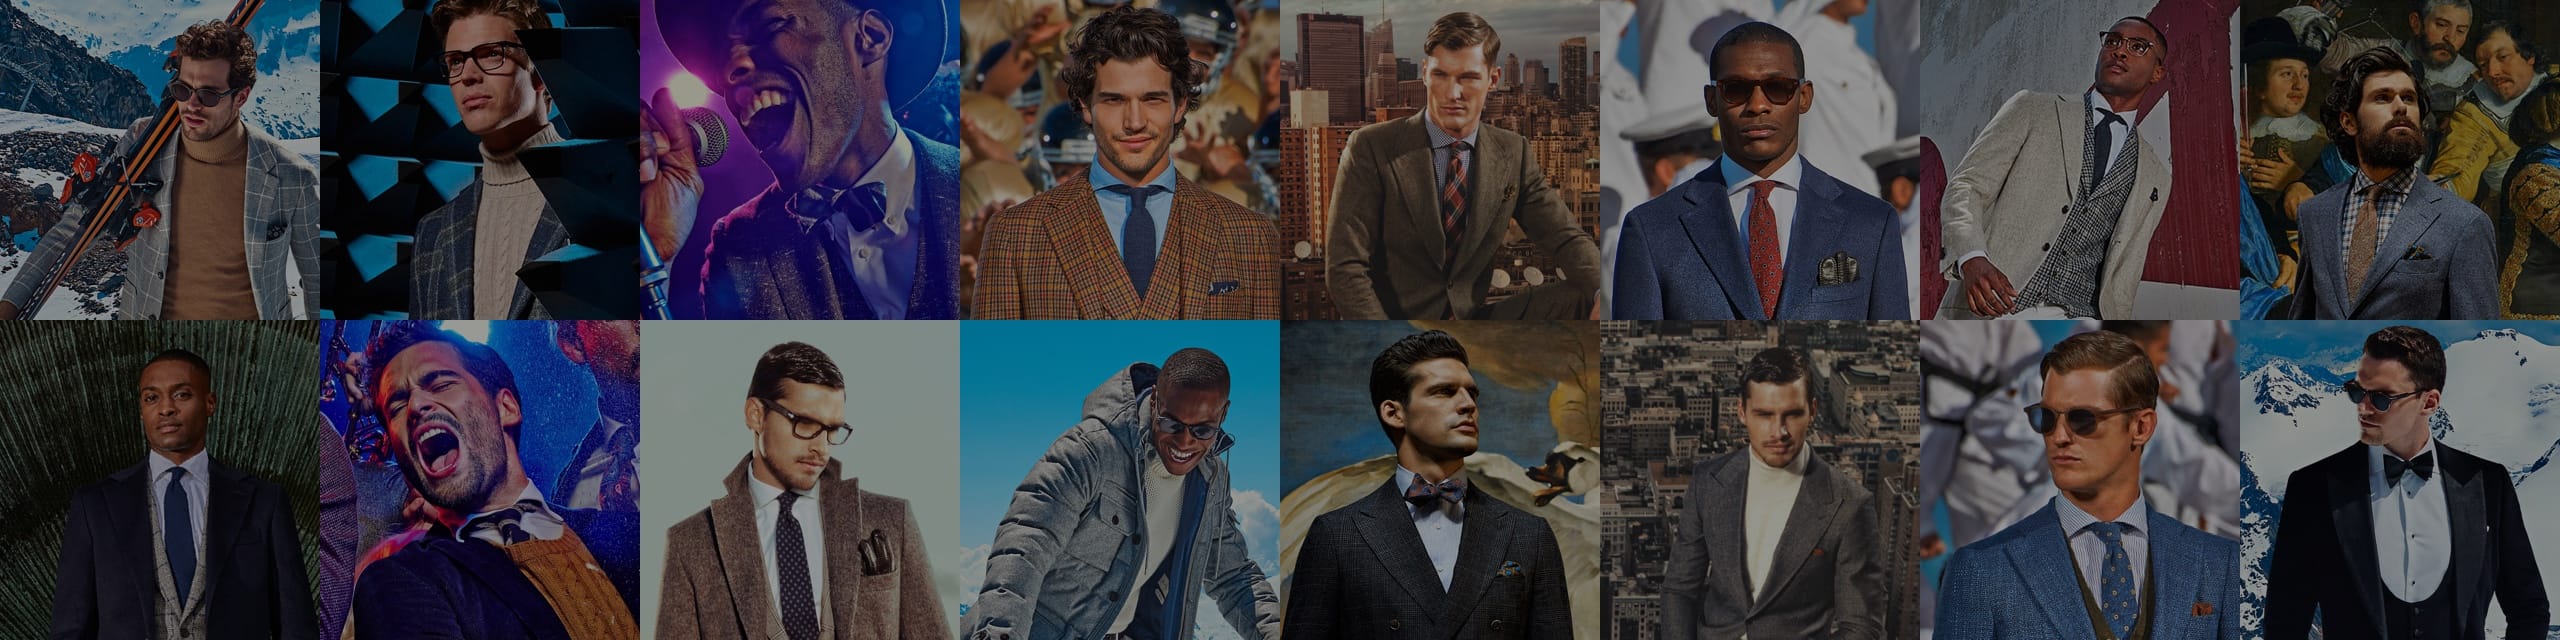 Suitsupply Outlet Sale January 2019